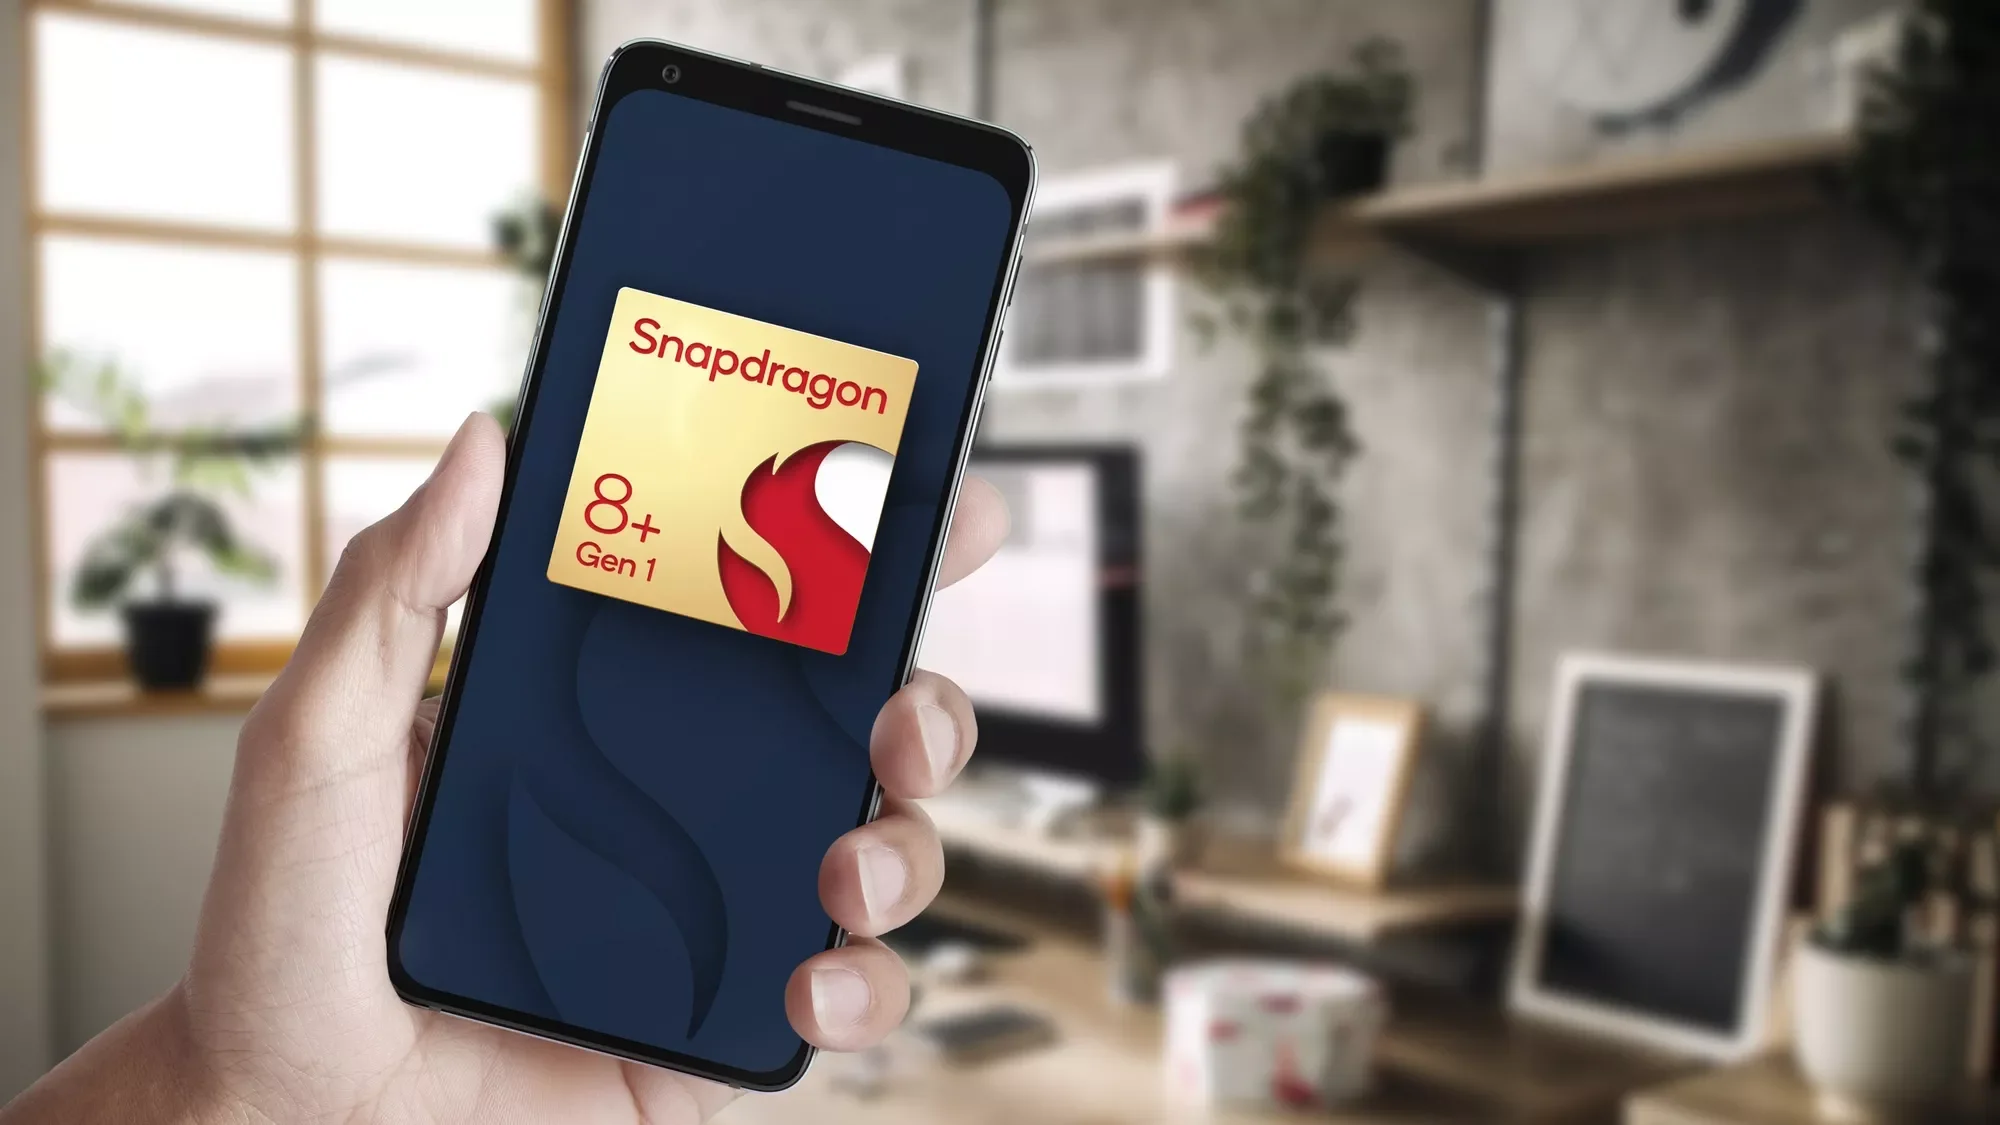 Mysterious smartphone with Snapdragon 8+ Gen 1 tops AnTuTu benchmark